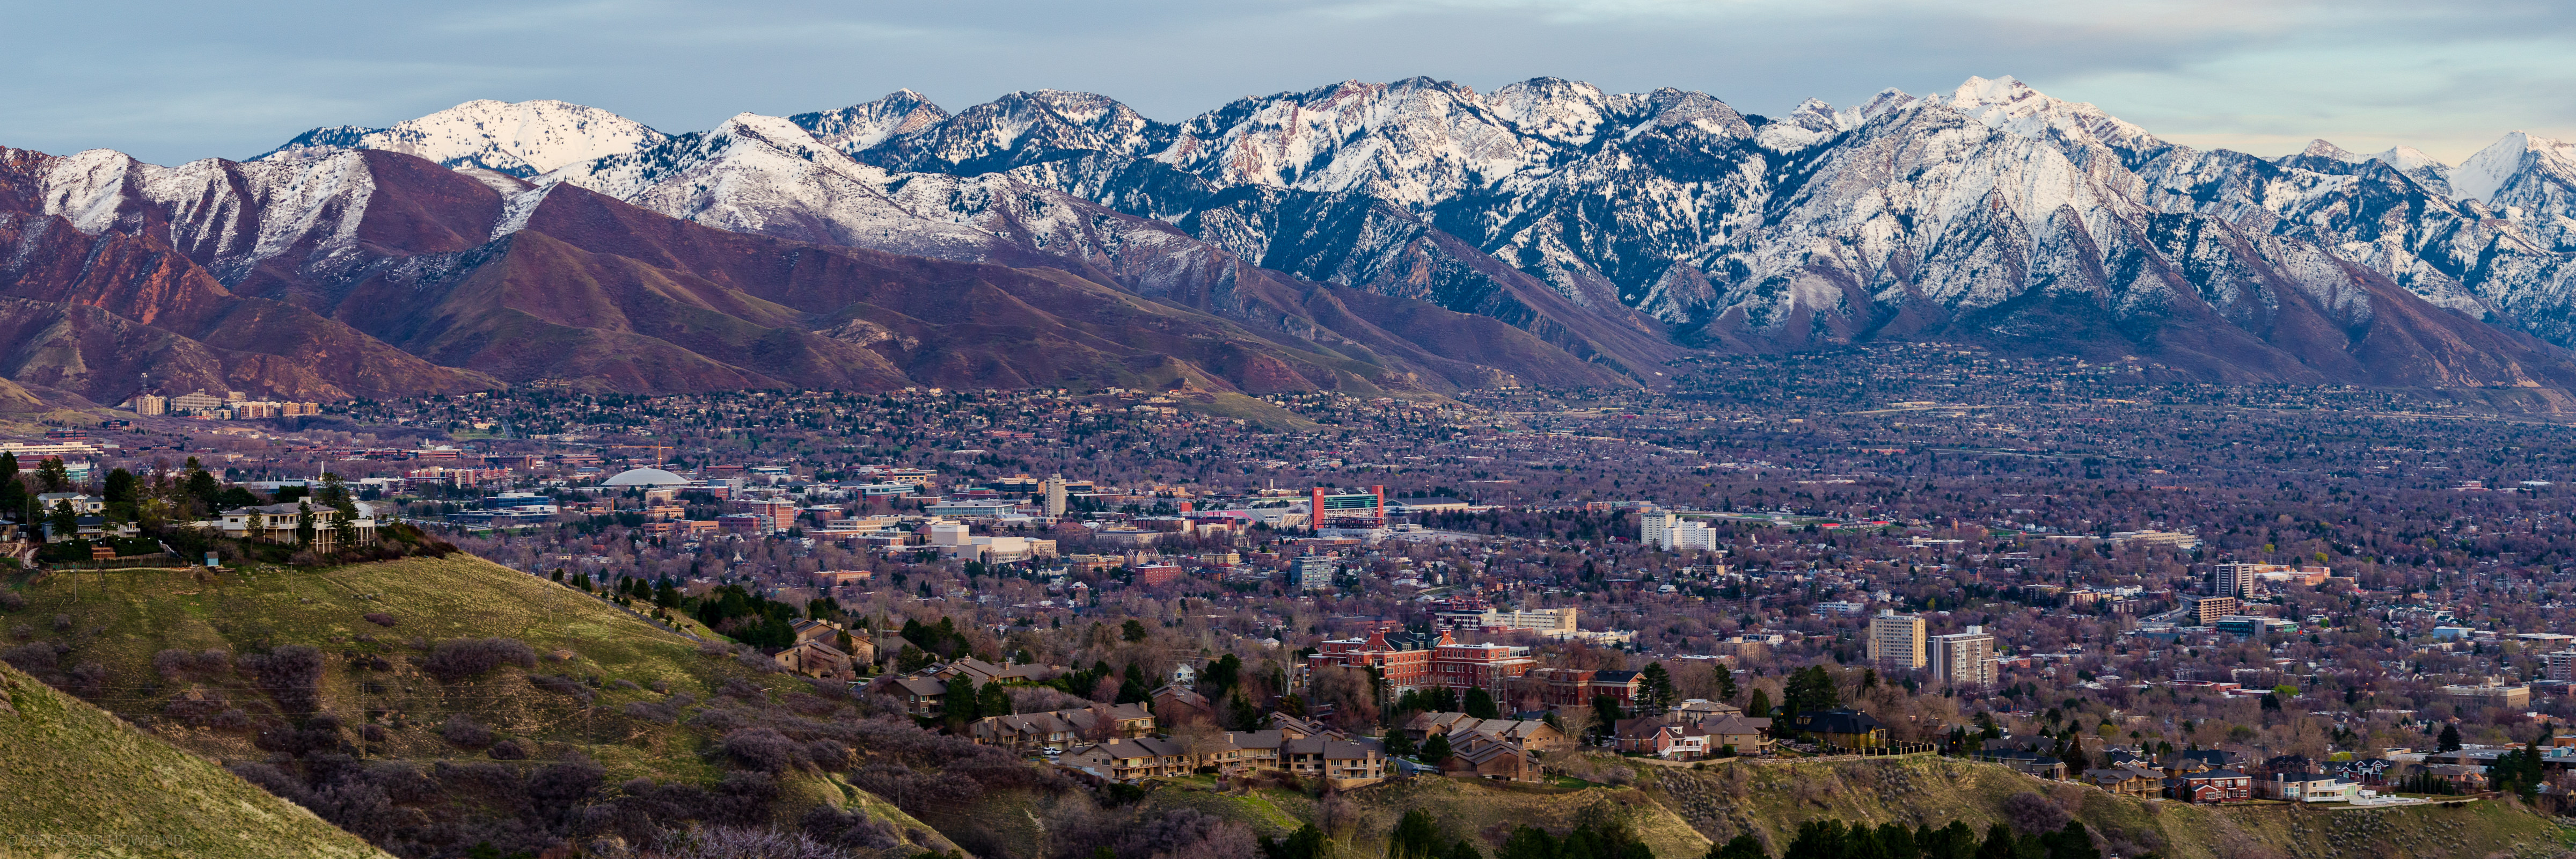 Salt Lake City and the Wasatch